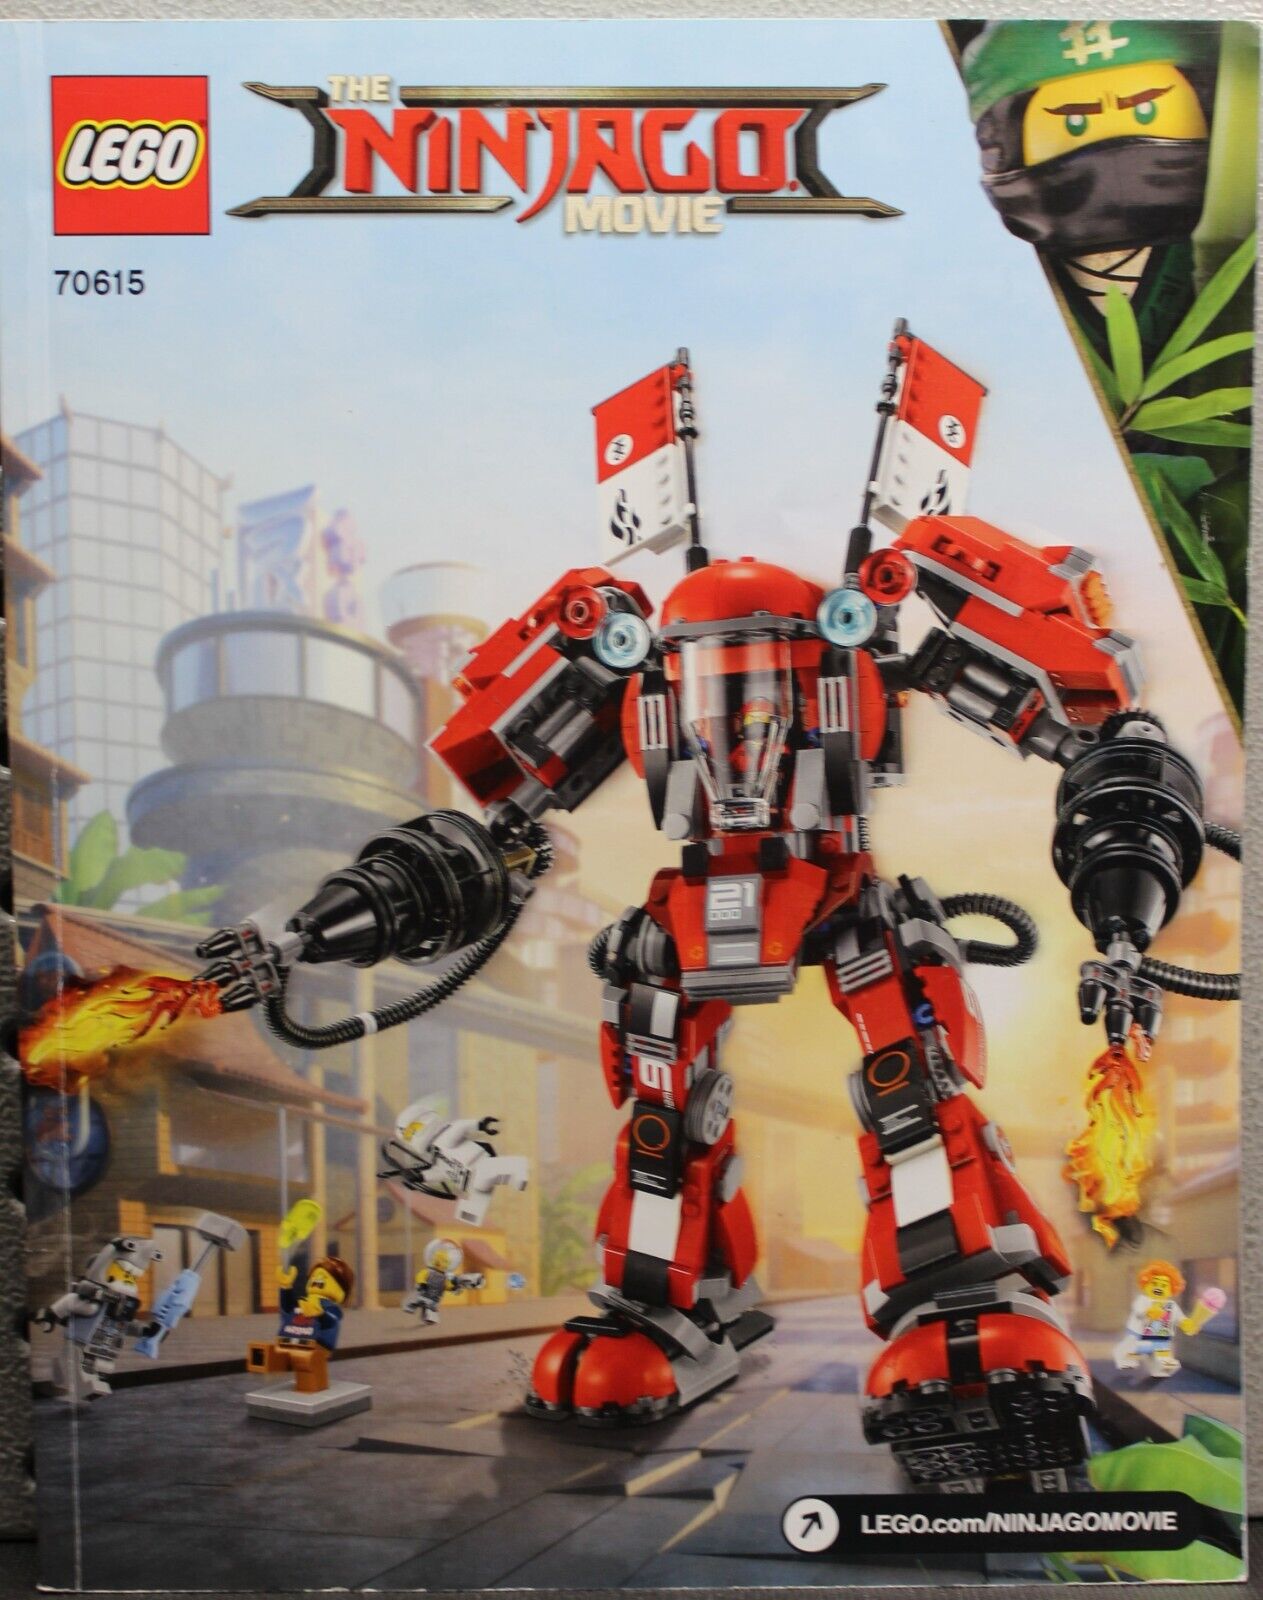 LEGO The Ninjago Movie 70615 Instruction Book / Manual (Book Only) (a)